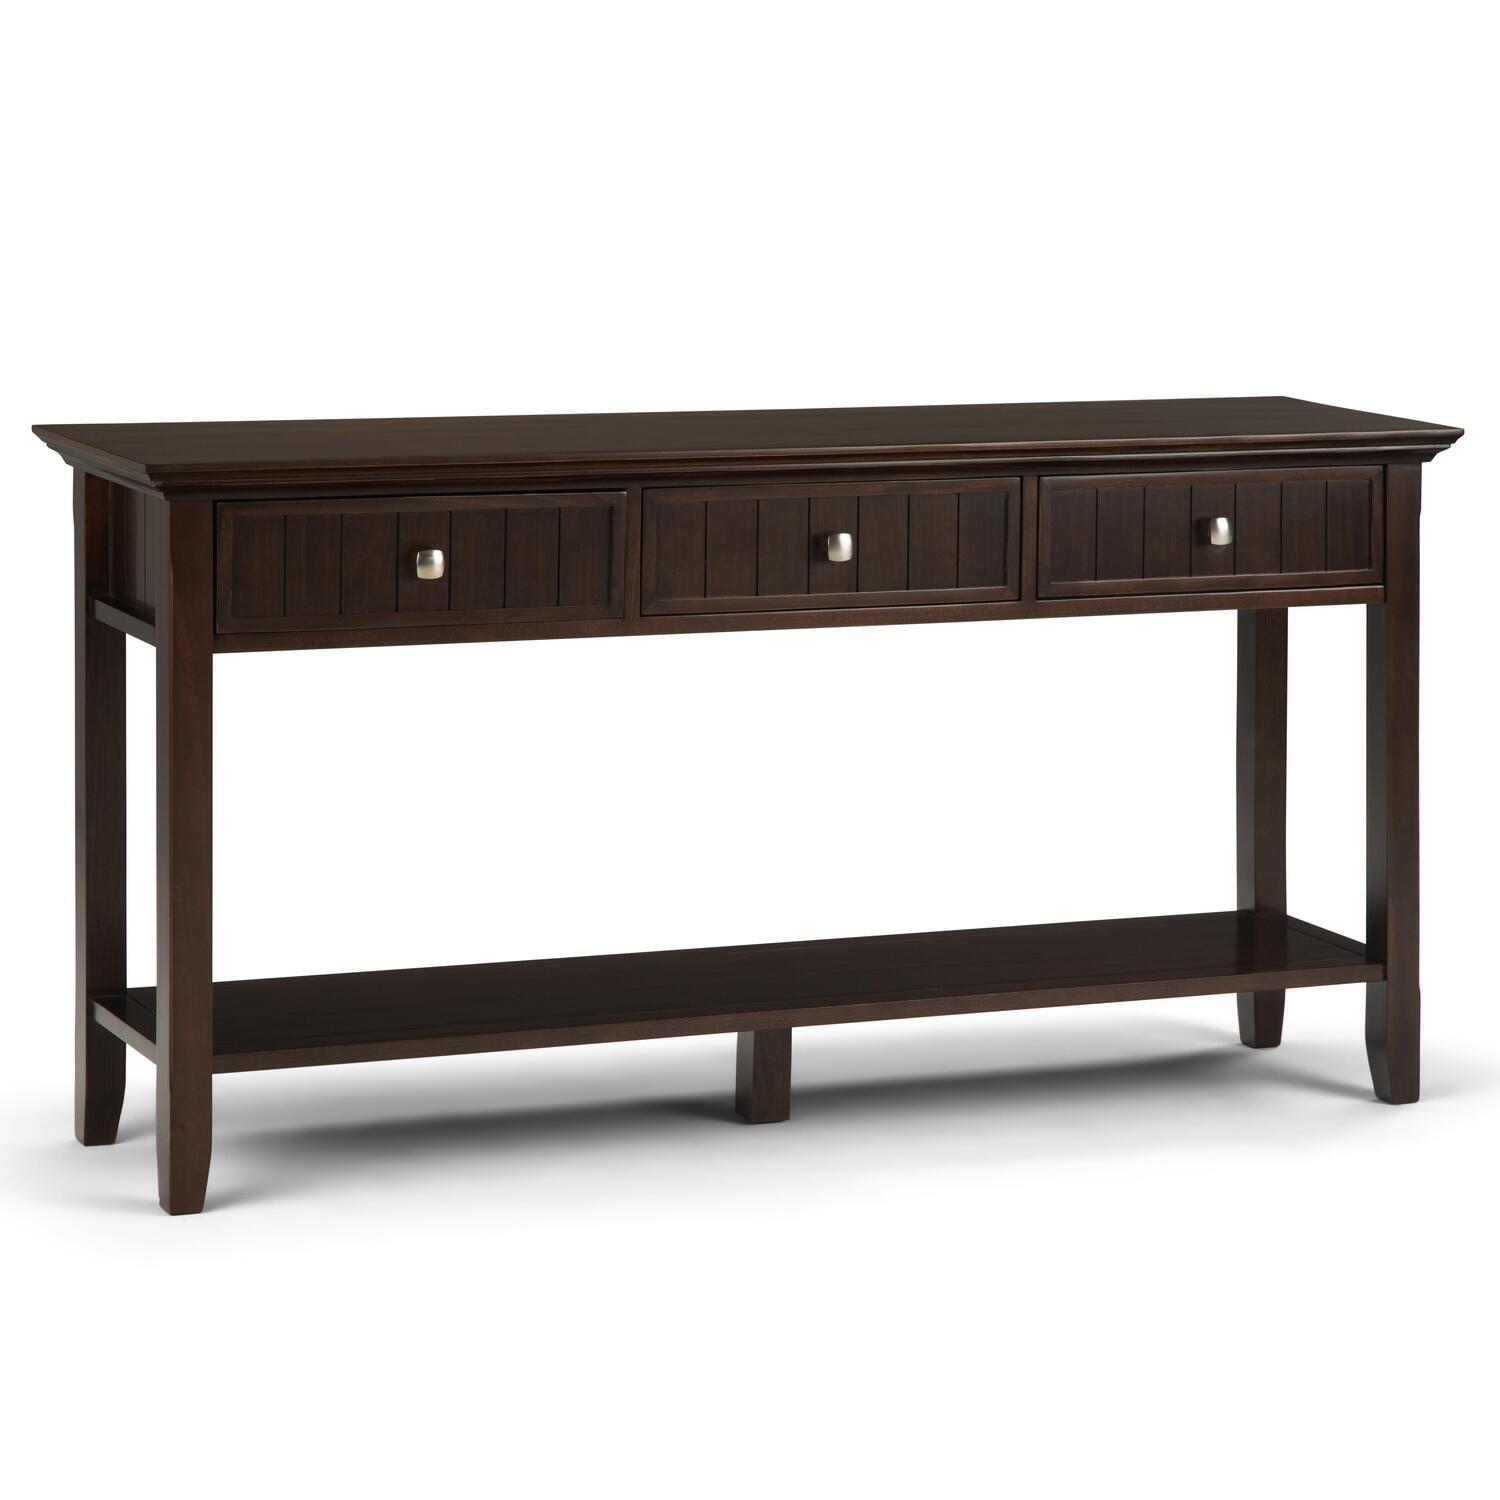 Brunette Brown Solid Pine Console Table with Storage and Elegantly Tapered Legs